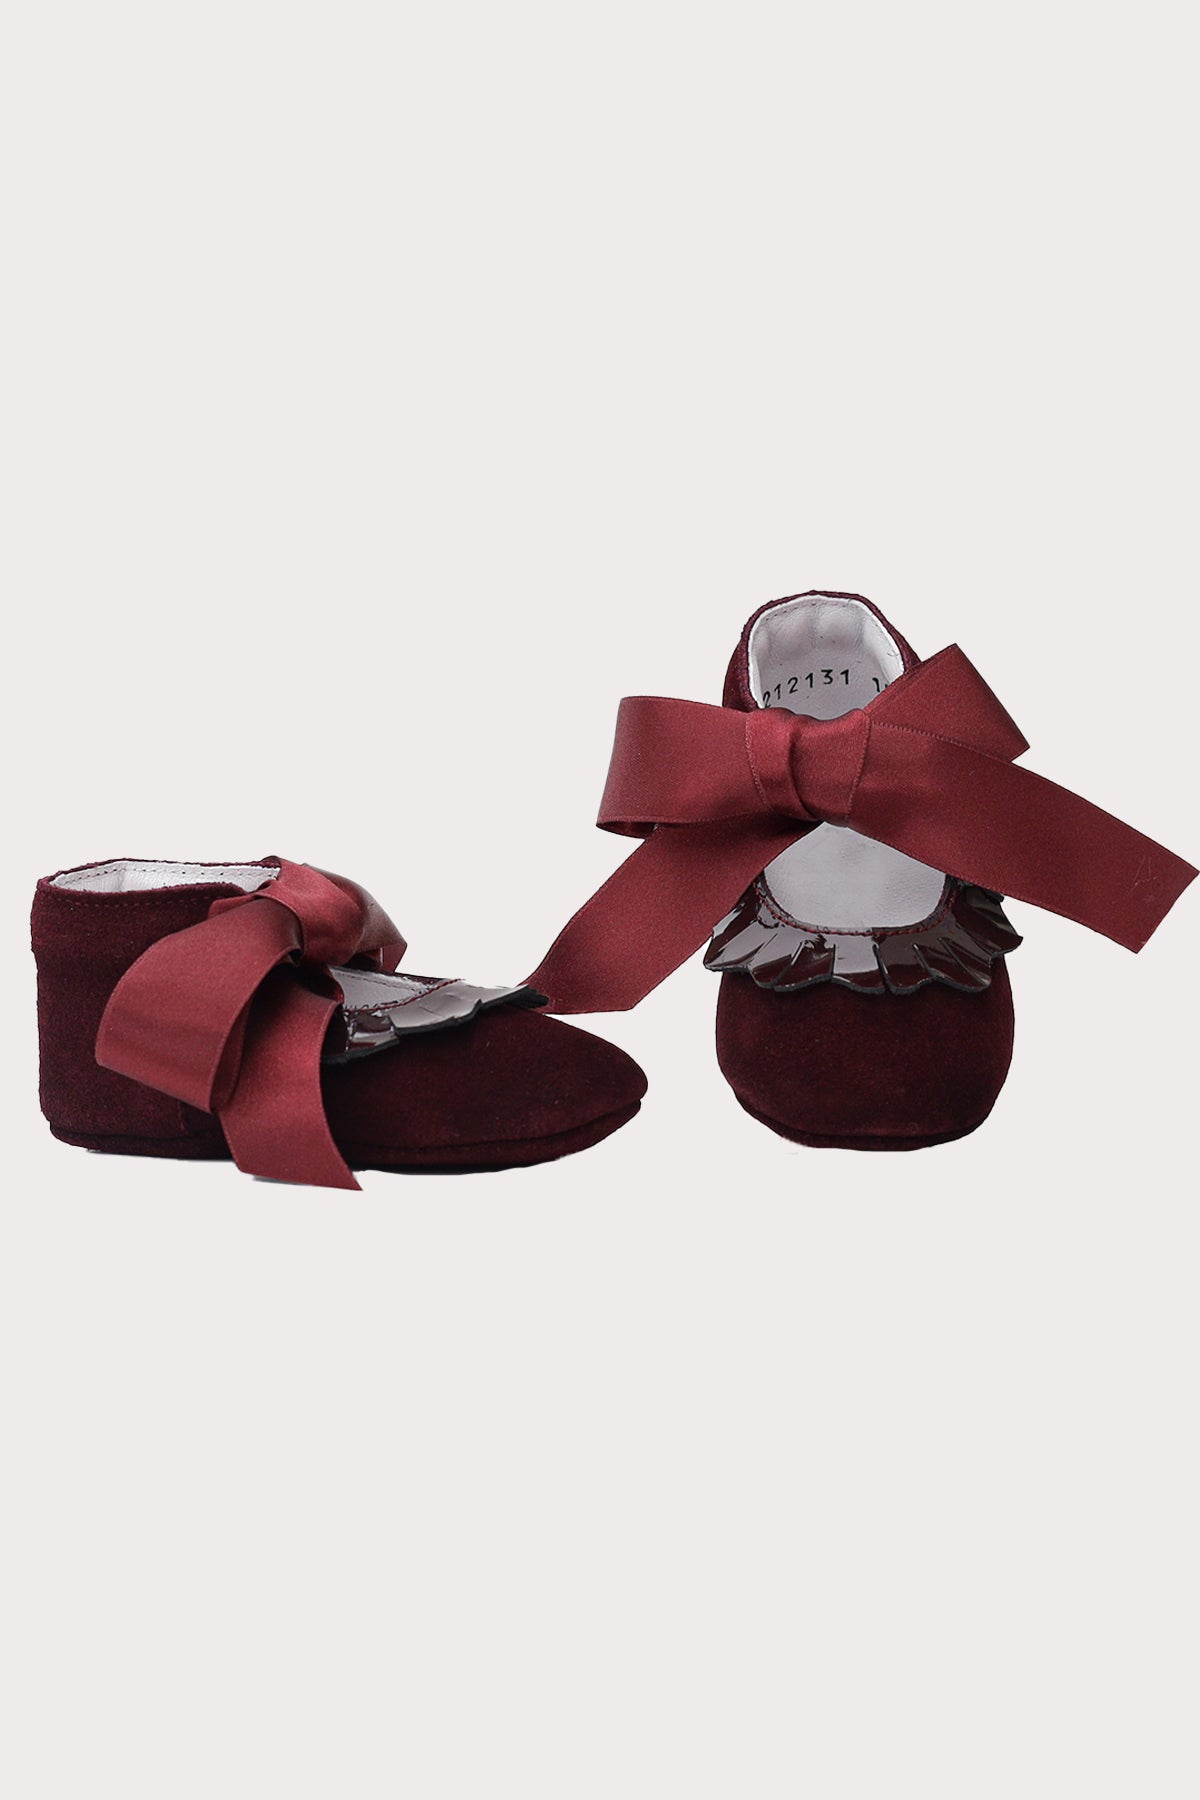 burgundy nubuck leather & patent leather baby shoes